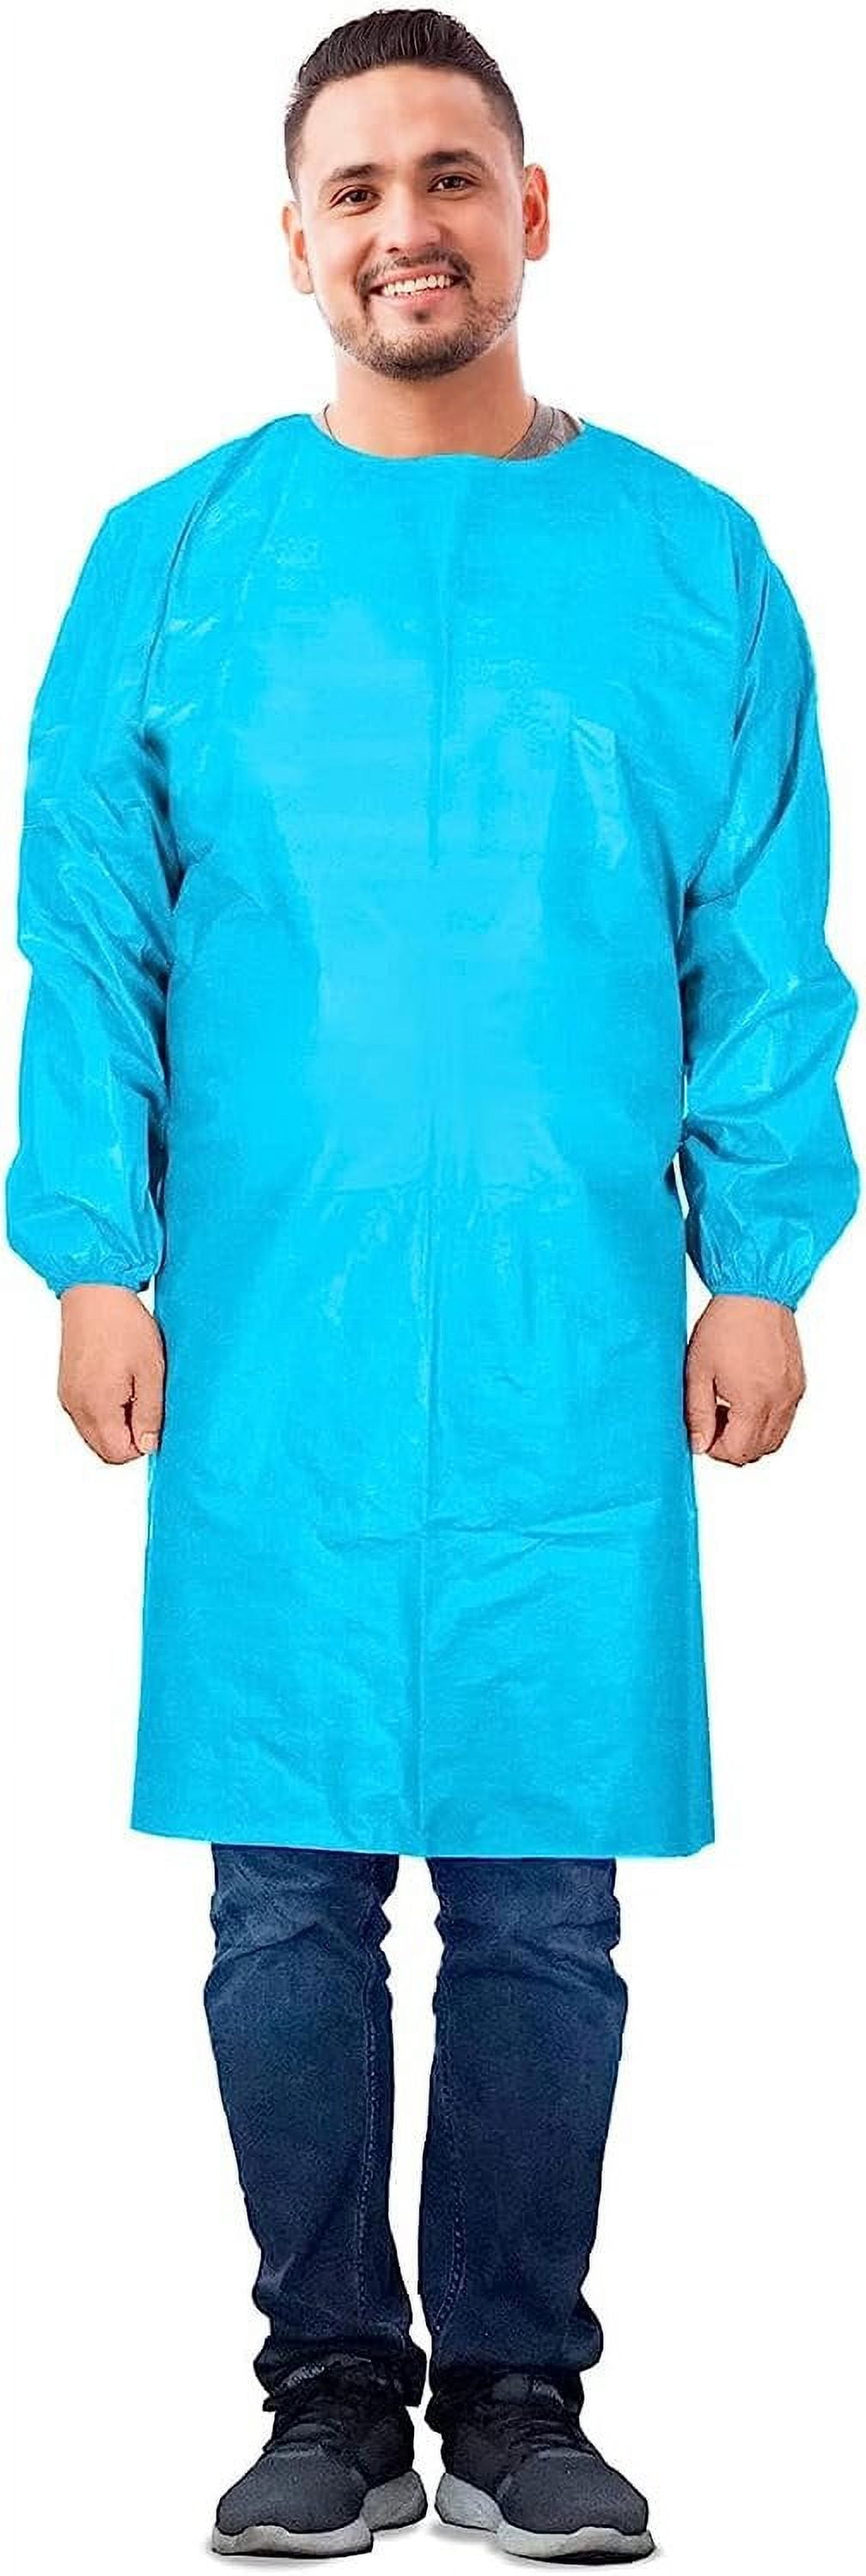 Polyethylene Level 1 Disposable Non-Surgical Isolation Gowns Blue Plastic  Gown with Thumb Hole - China Plastic Gown, PE Gown | Made-in-China.com